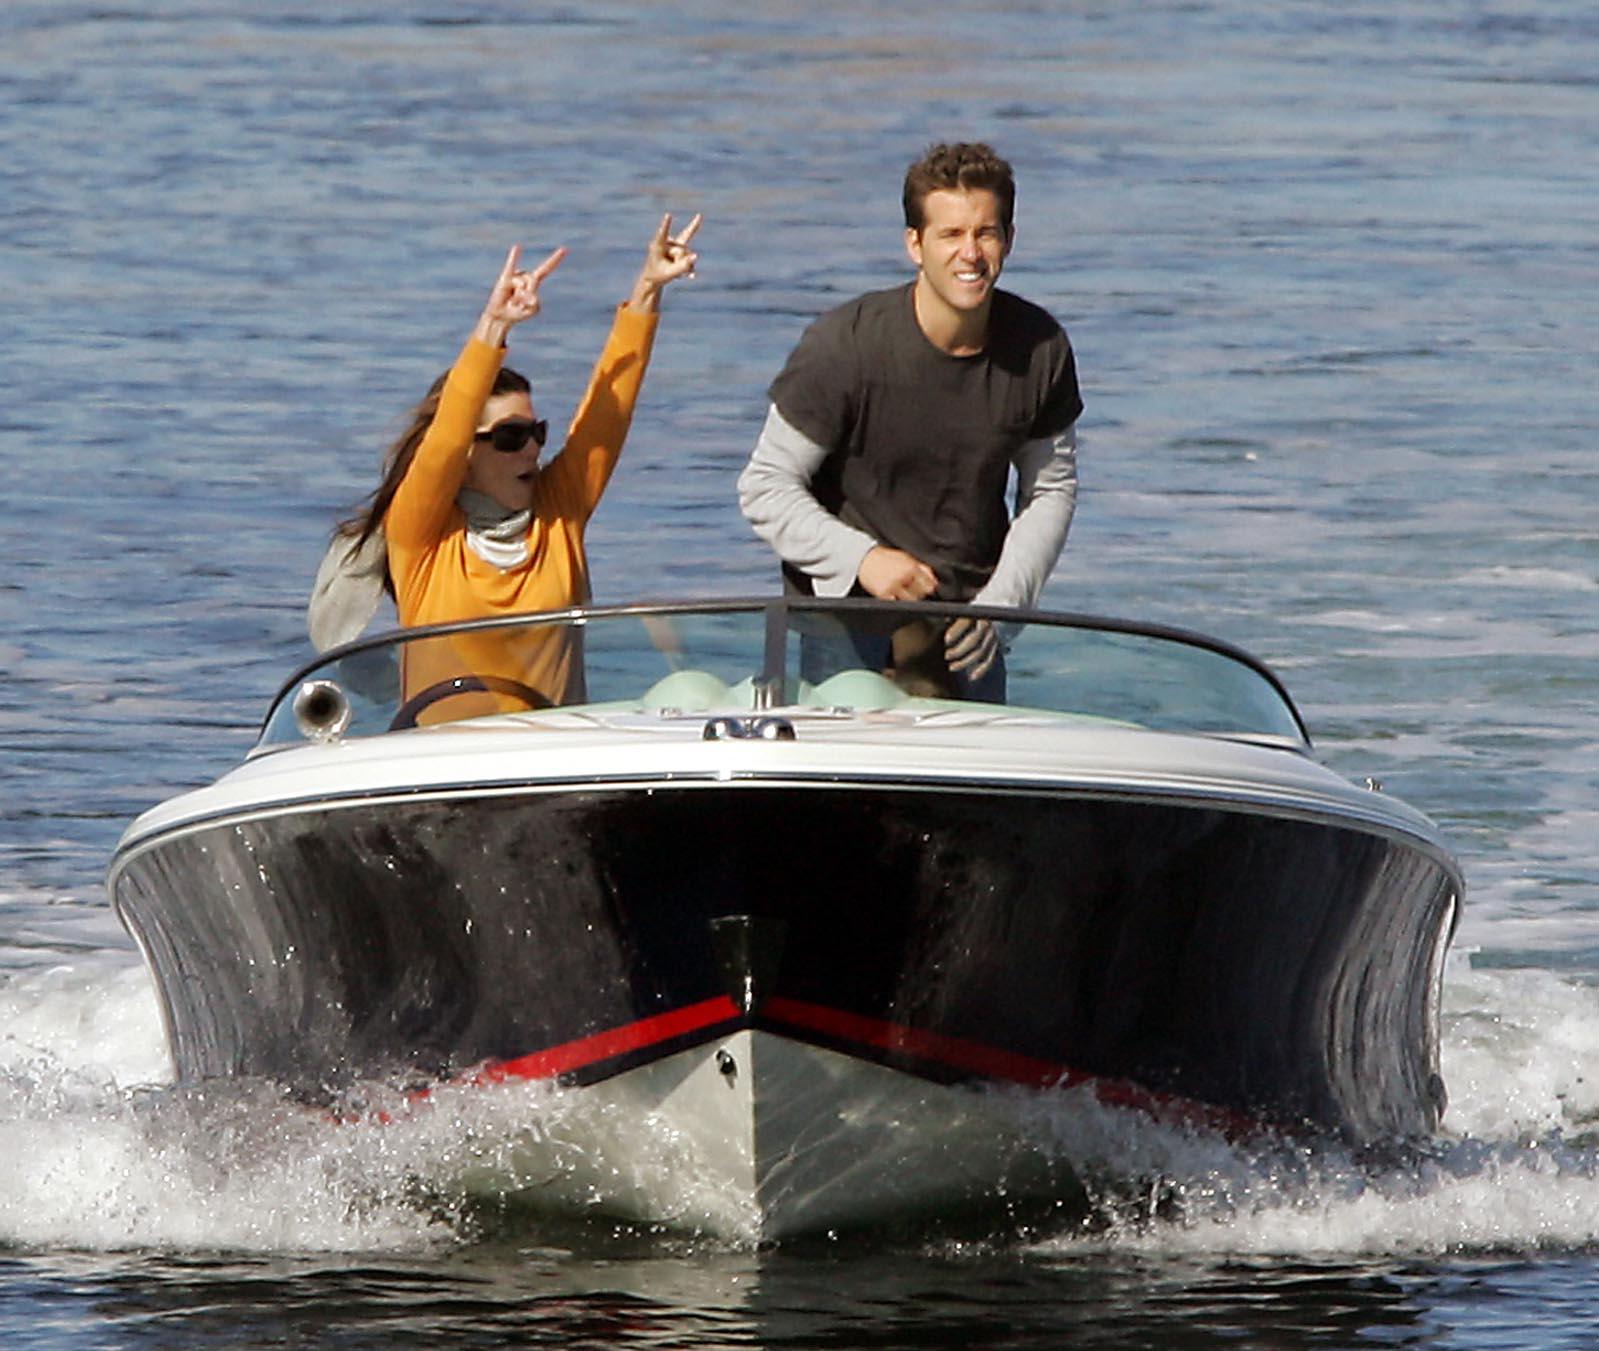 Sandra Bullock and Ryan Reynolds on set for the movie "The Proposal"